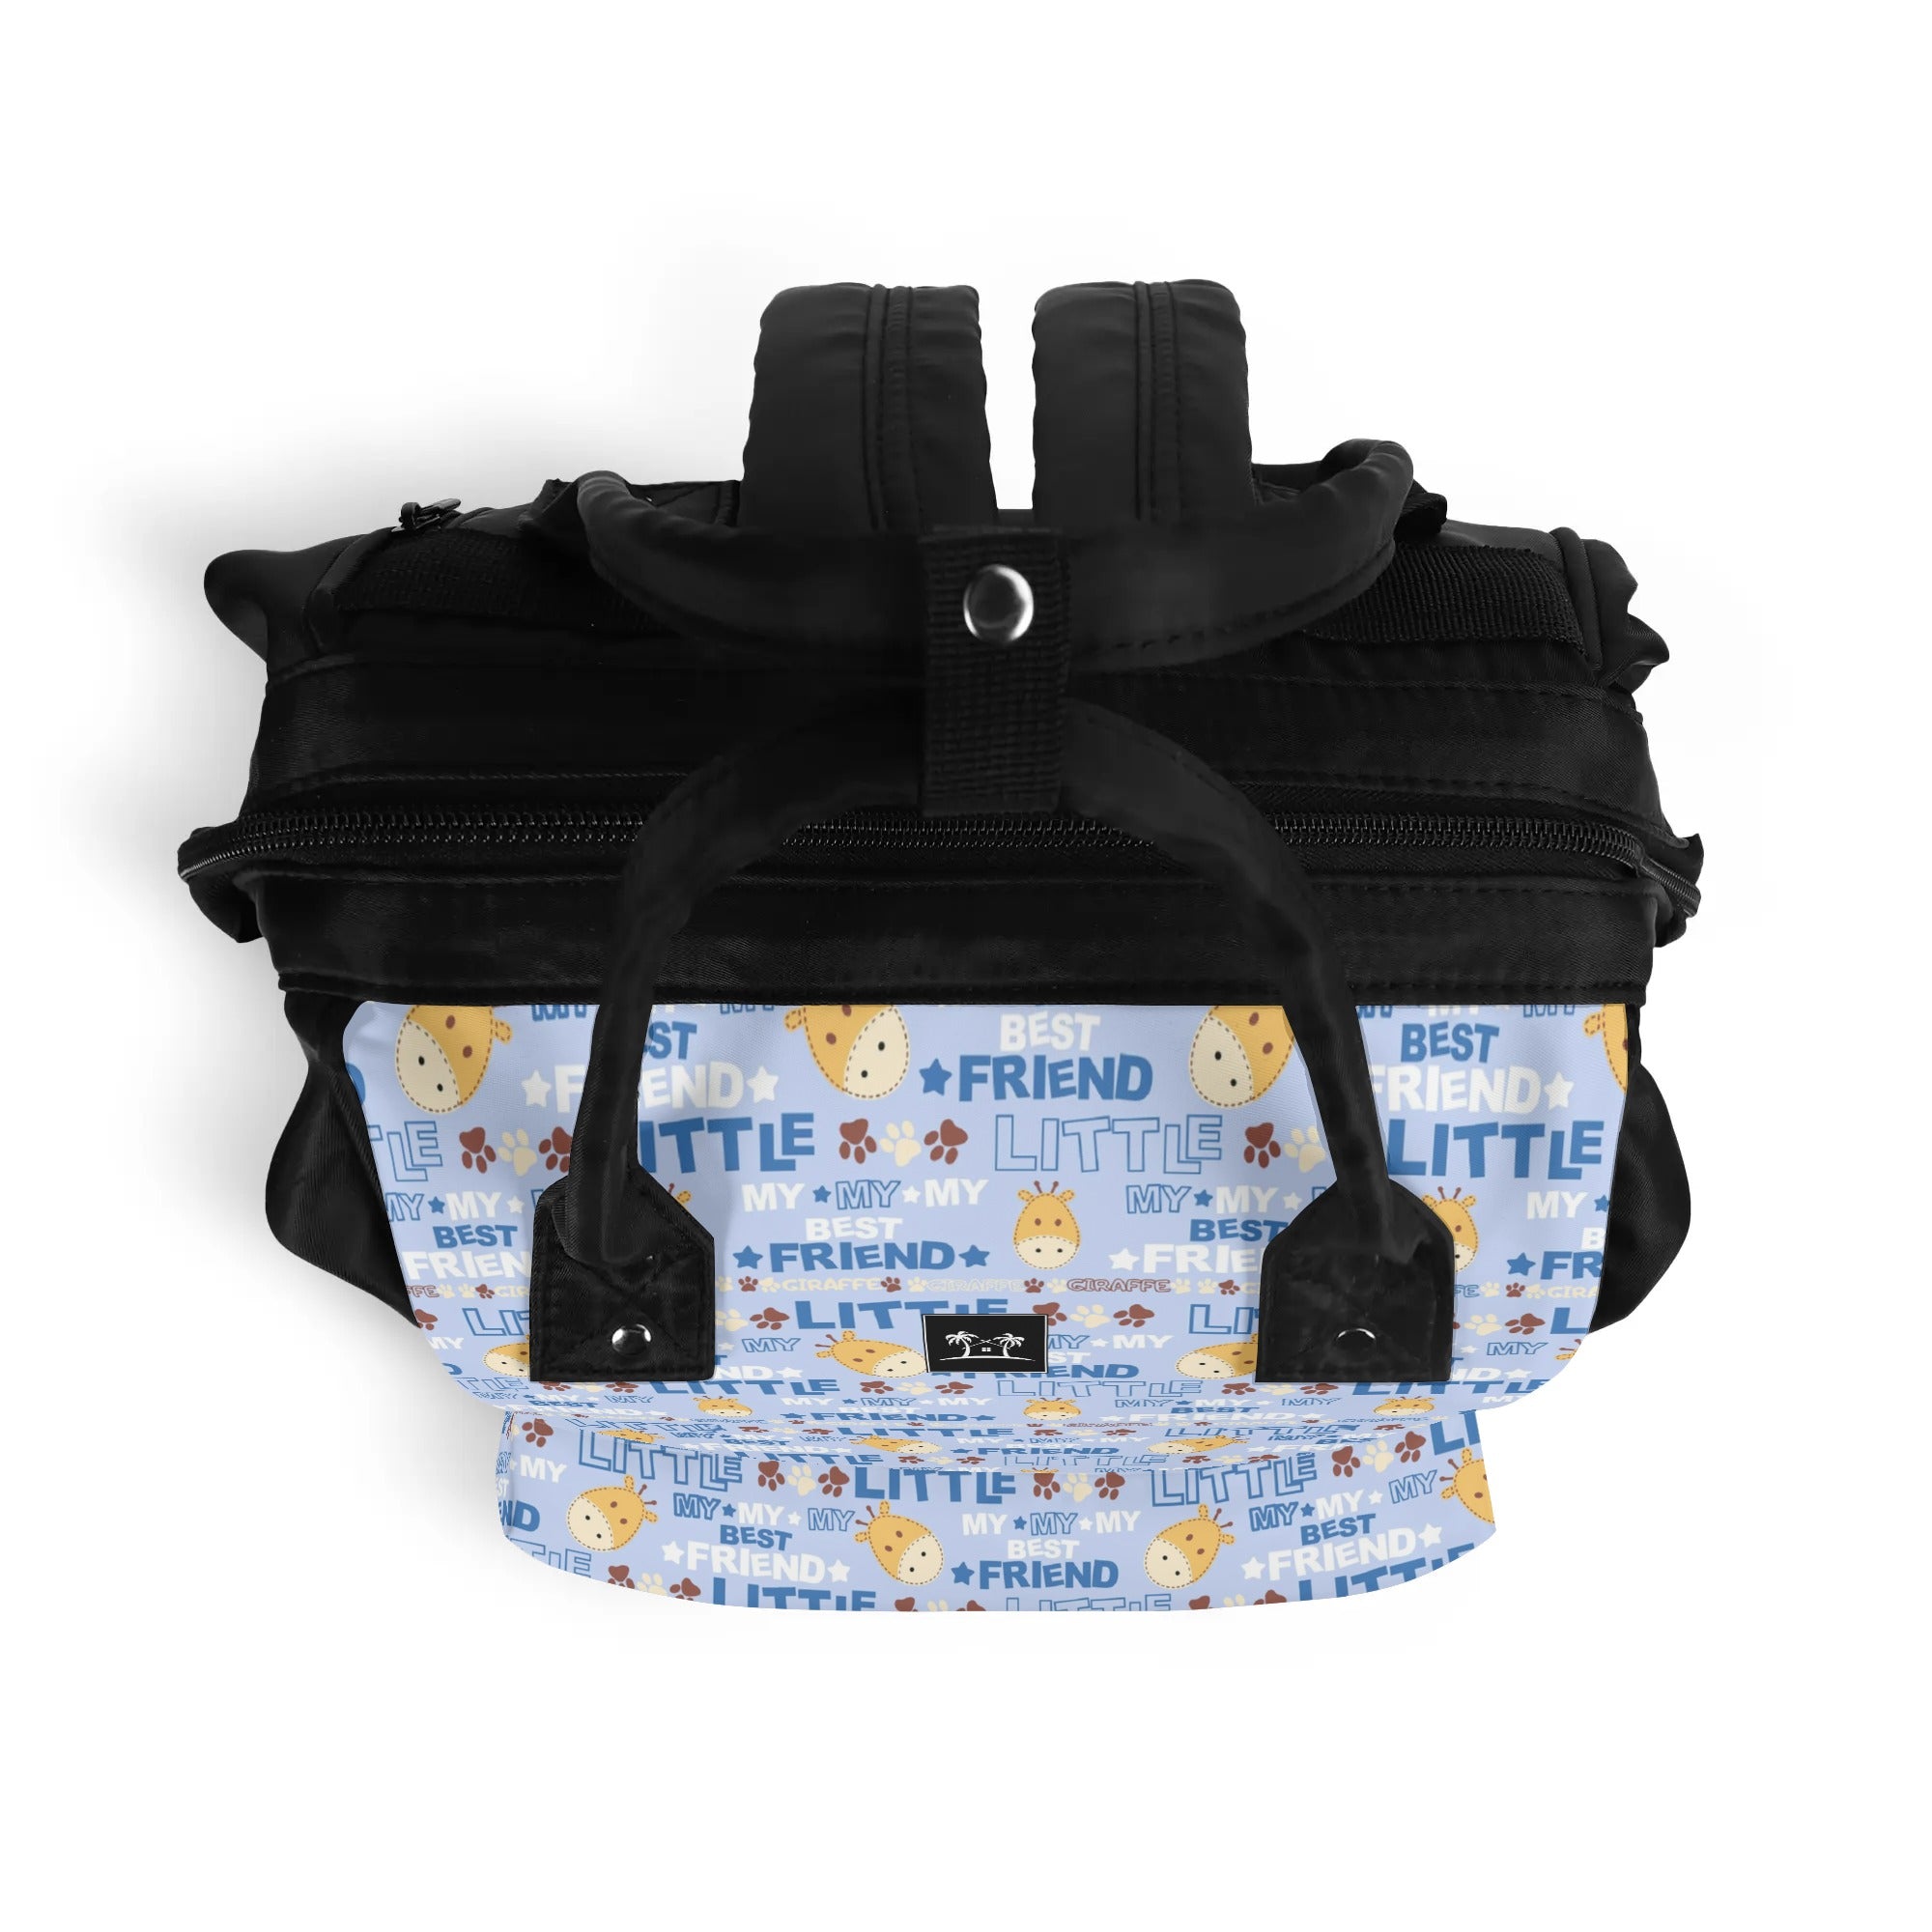 Large Capacity Diaper Backpack - My Little Best Friend